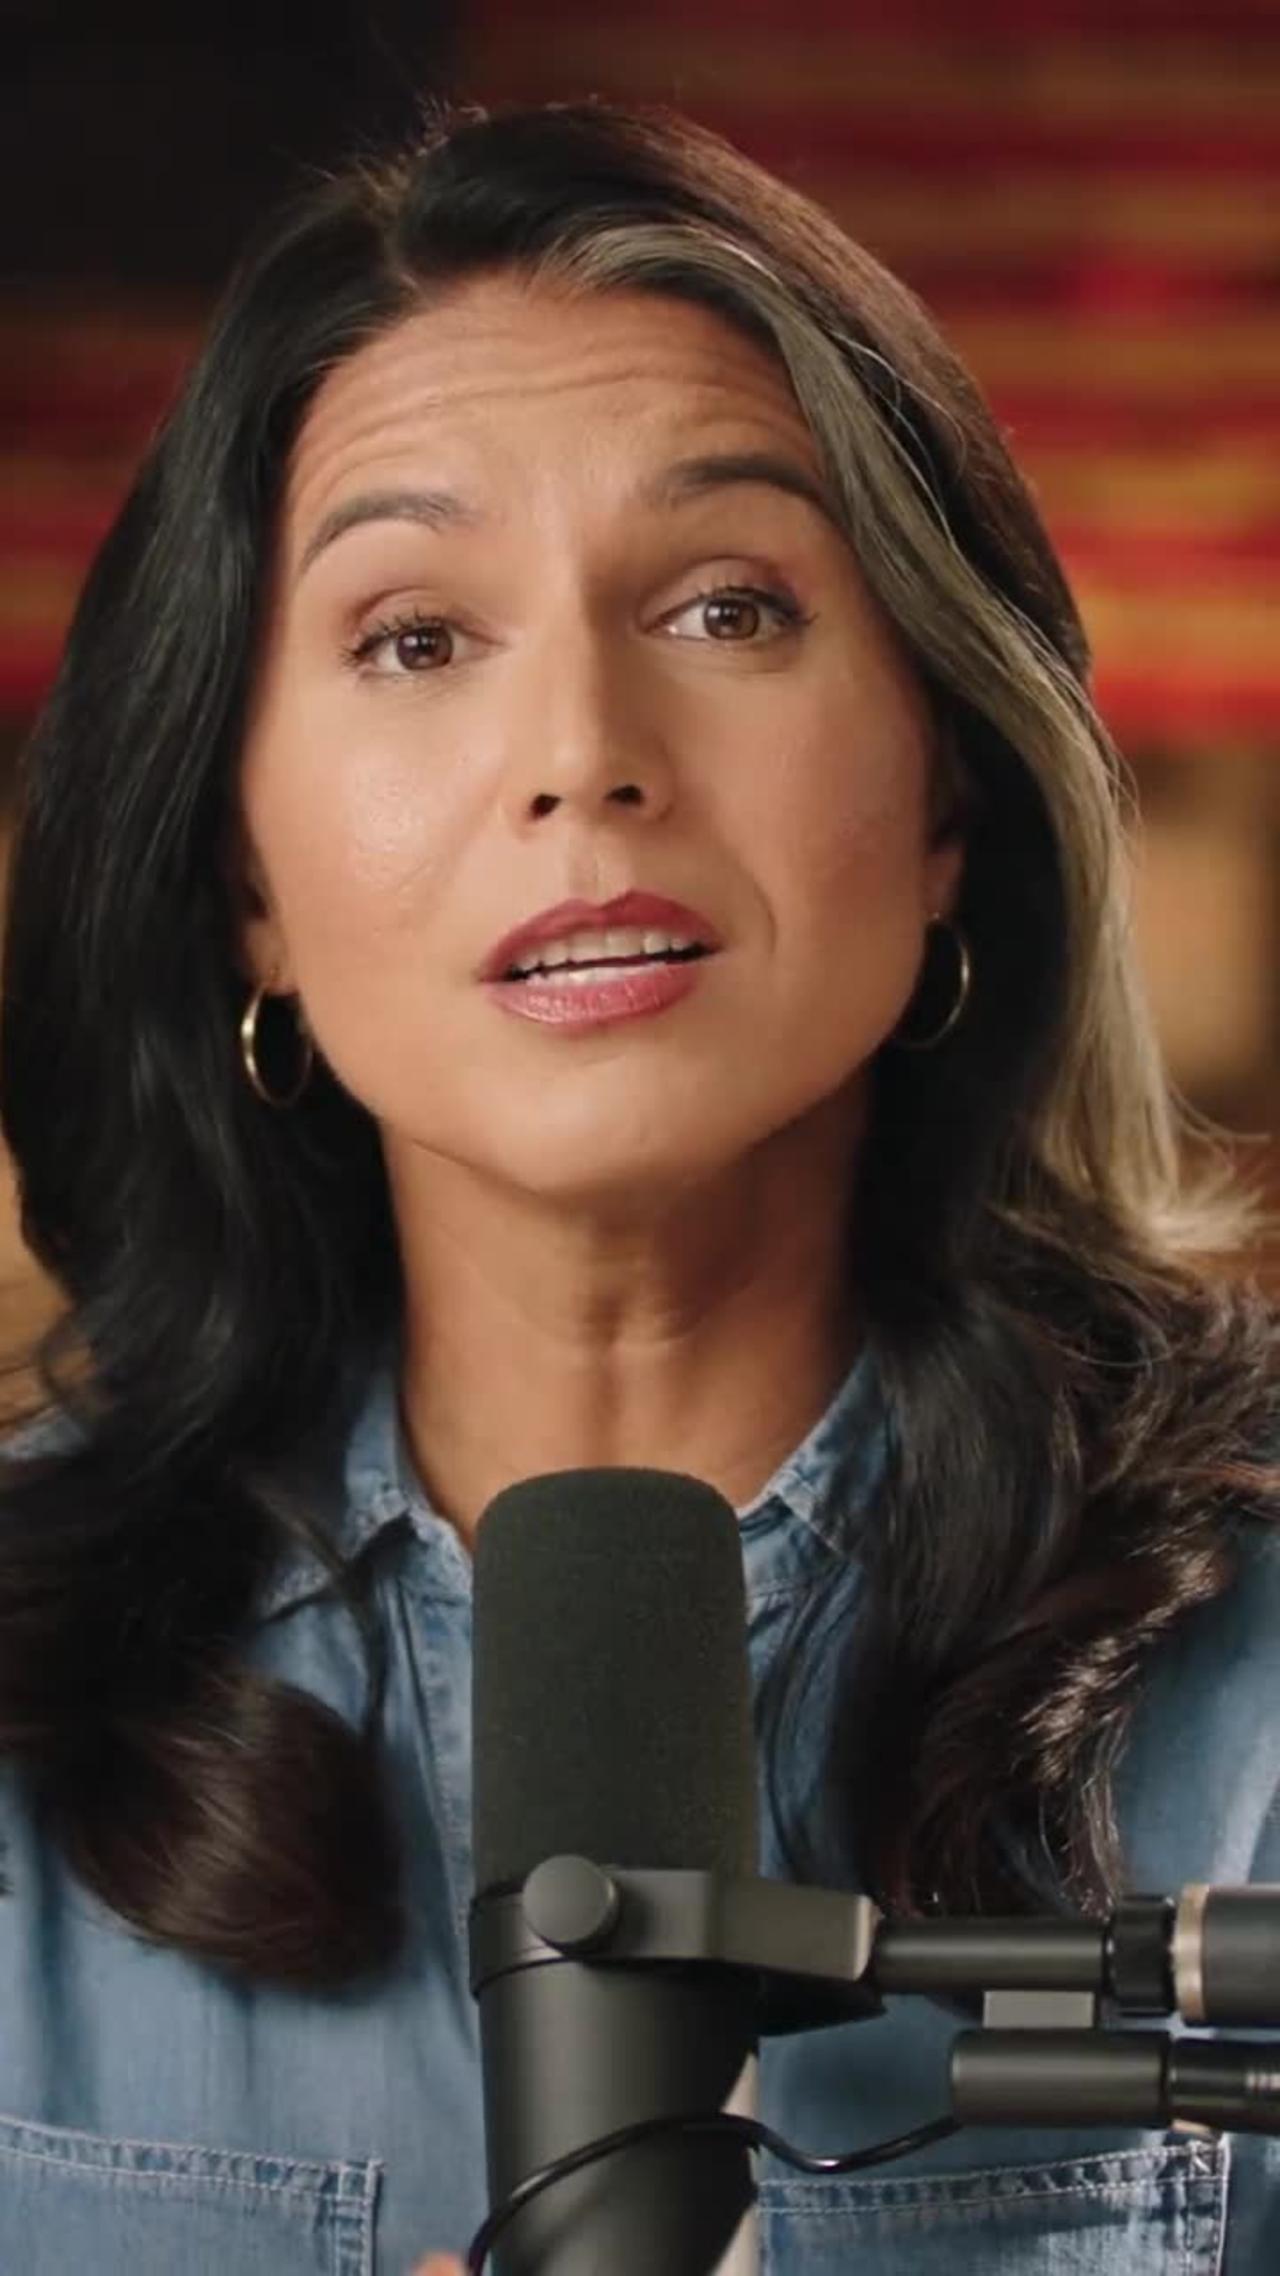 BREAKING: Tulsi Gabbard Announces She's Leaving the Democratic Party